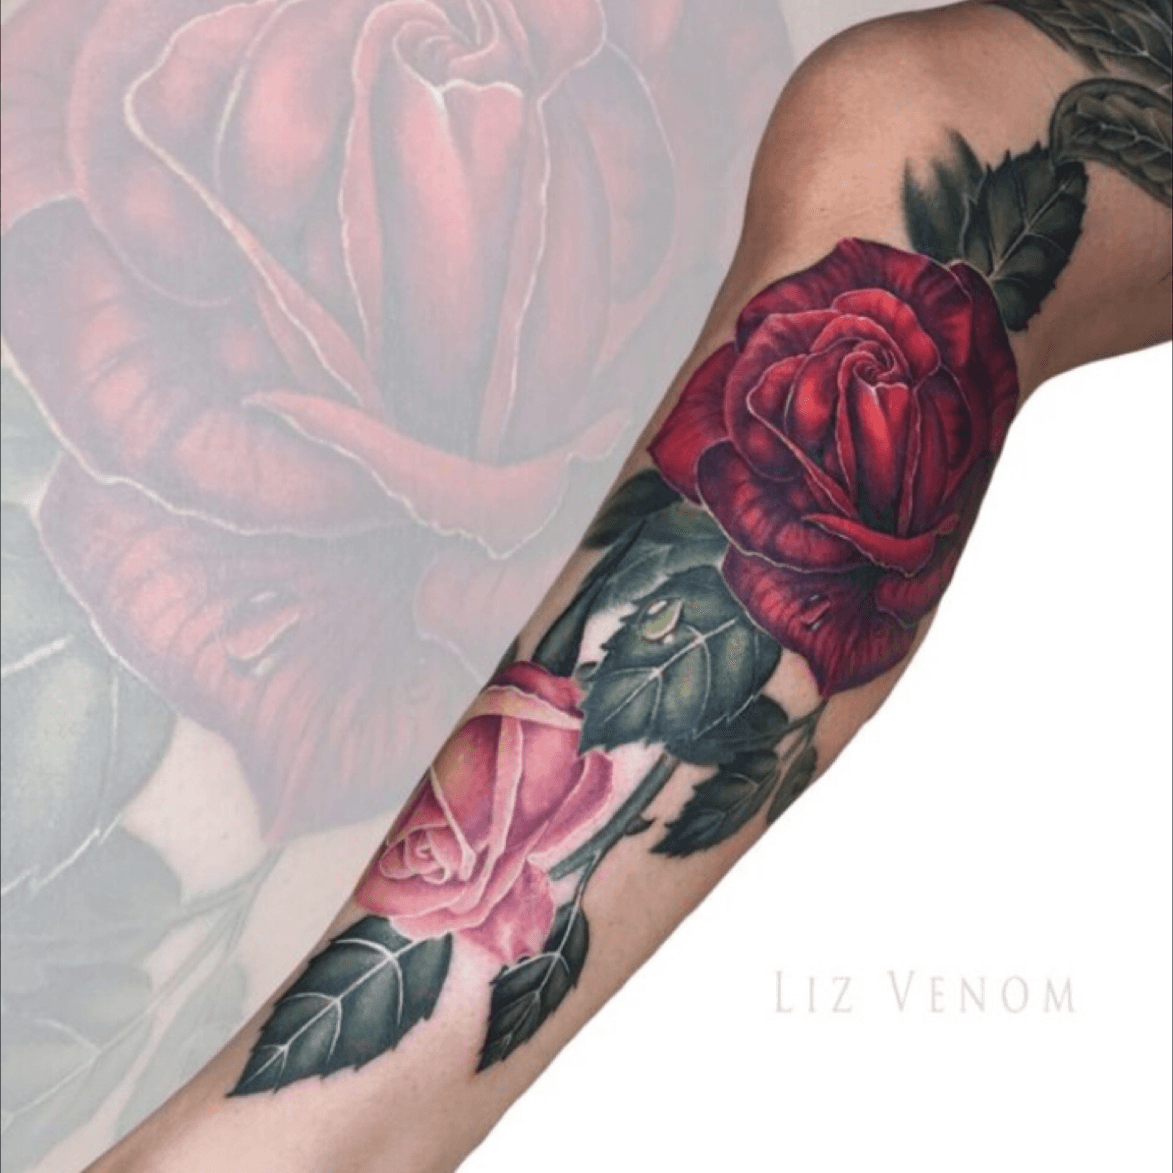 lv, tattoo and rose - image #6179096 on